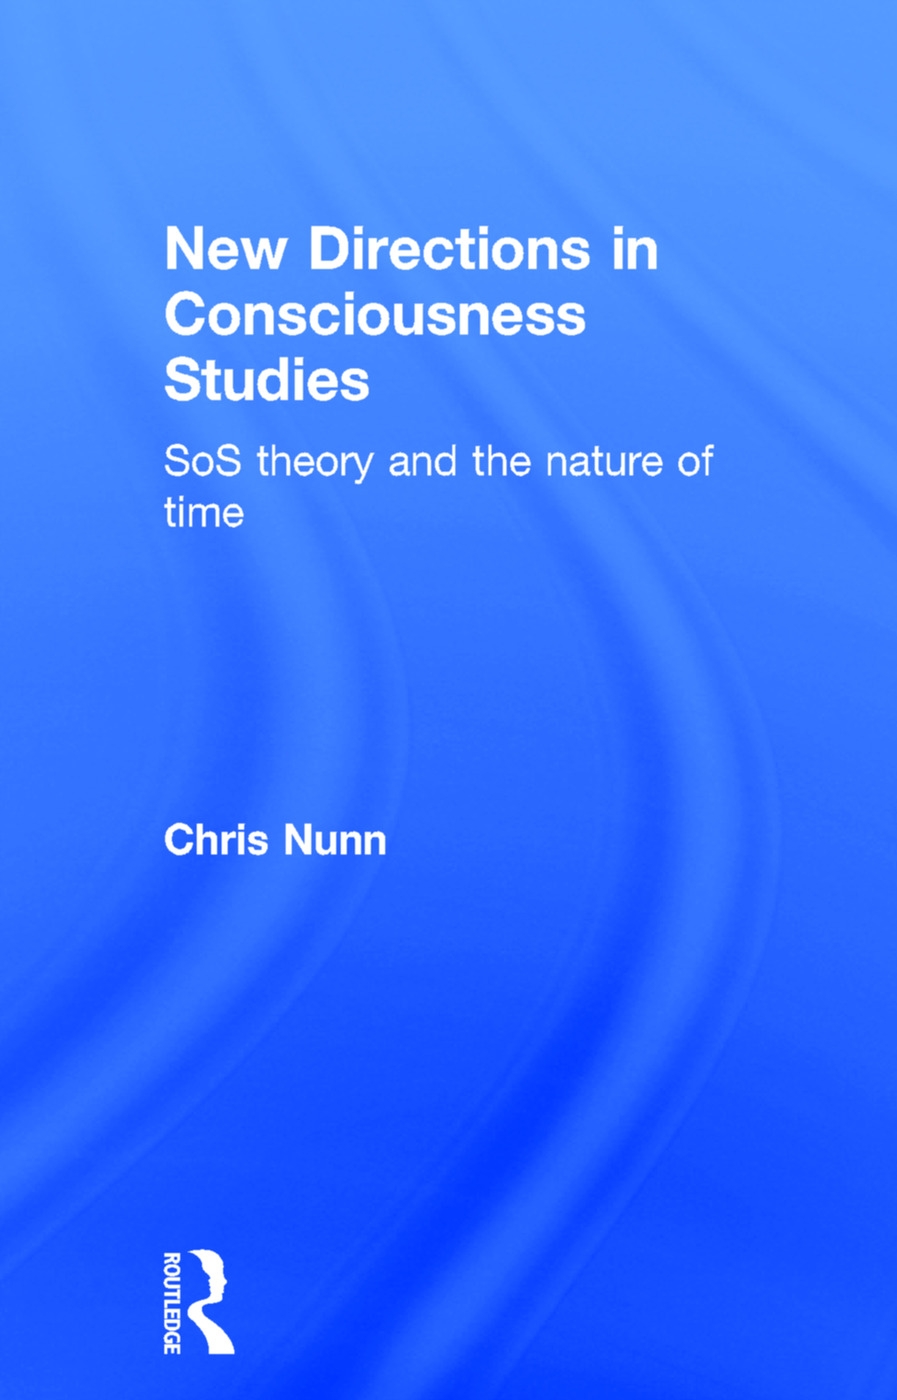 New Directions in Consciousness Studies: SOS Theory and the Nature of Time